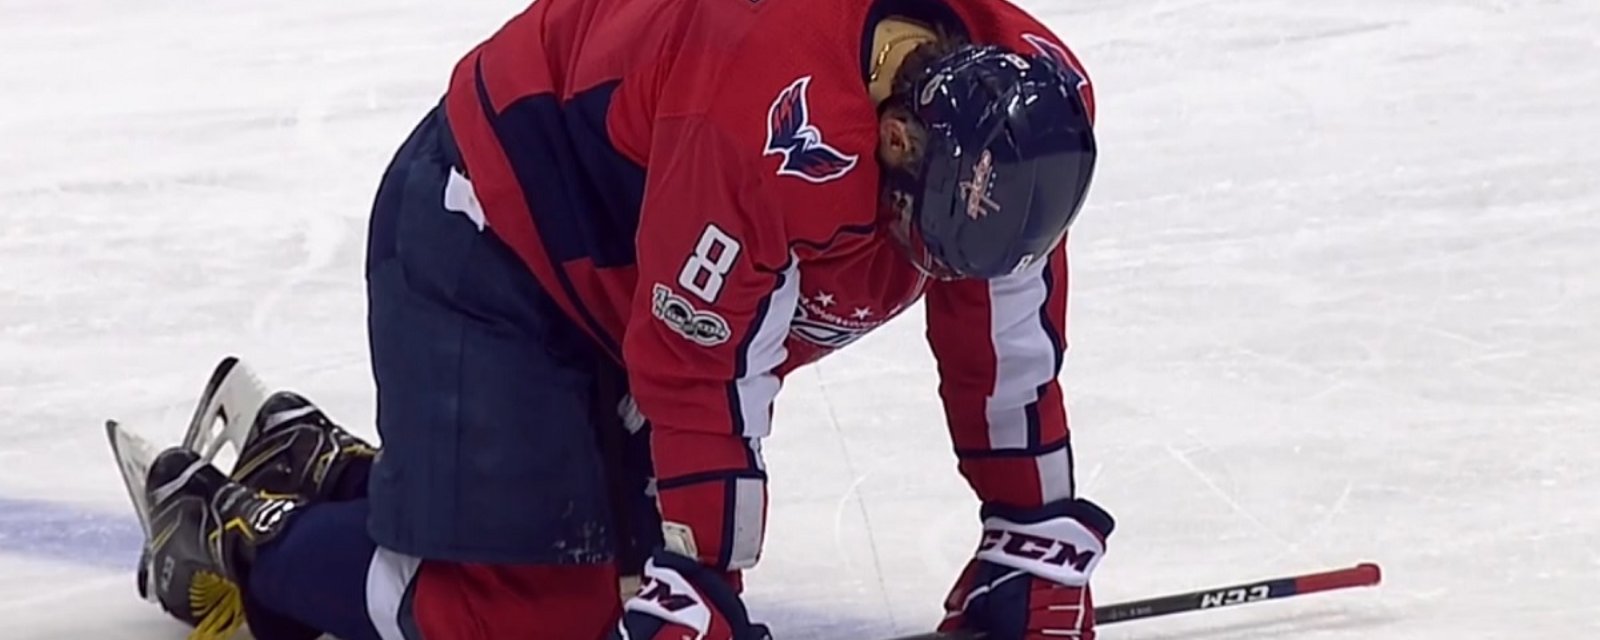 Ovechkin shaken up after blatant knee on knee hit.